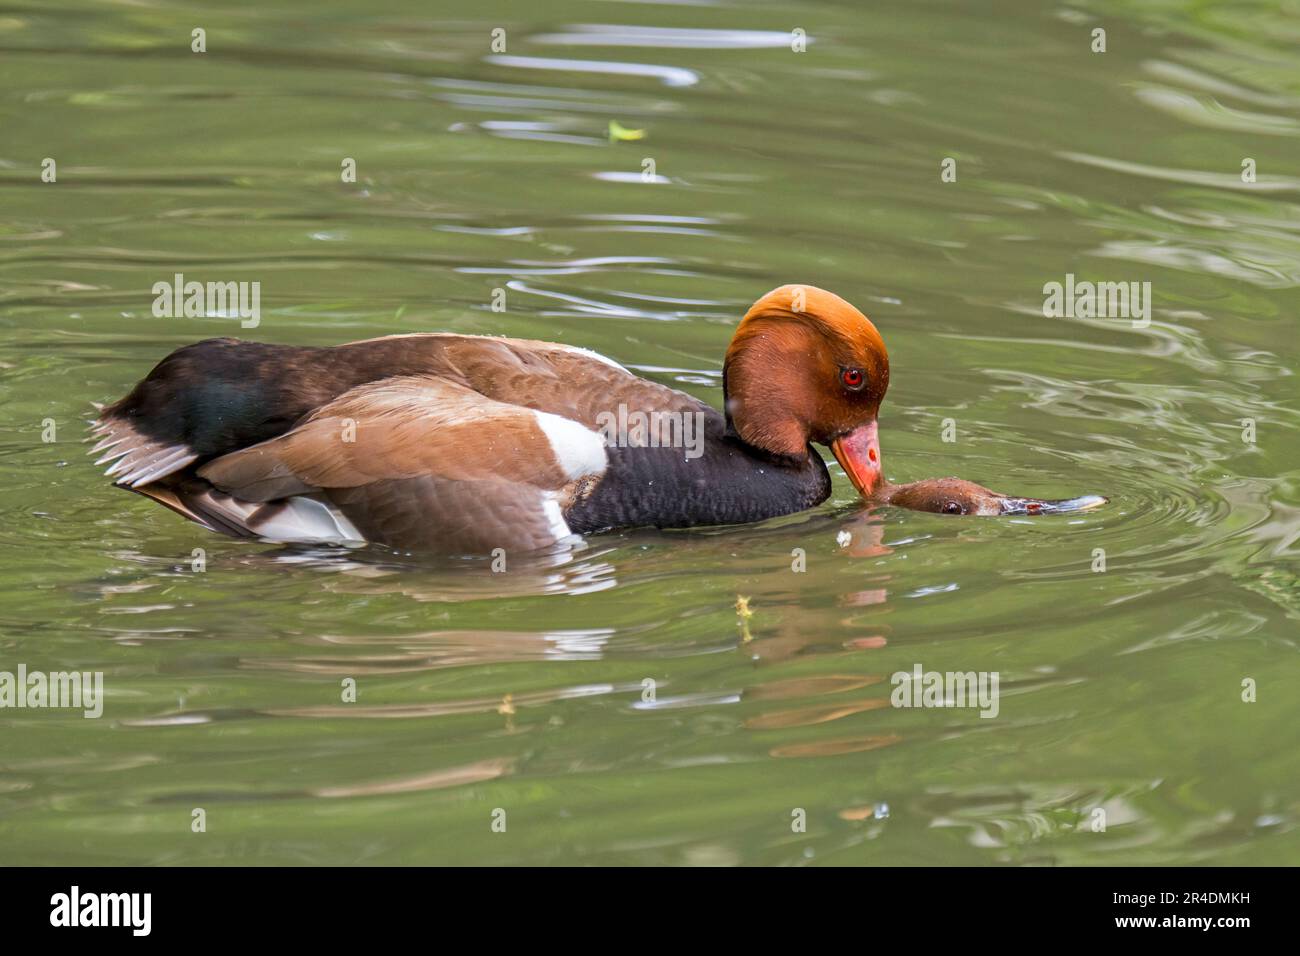 Red-crested pochard (Netta rufina) male mating / copulating with female in water of pond in spring Stock Photo